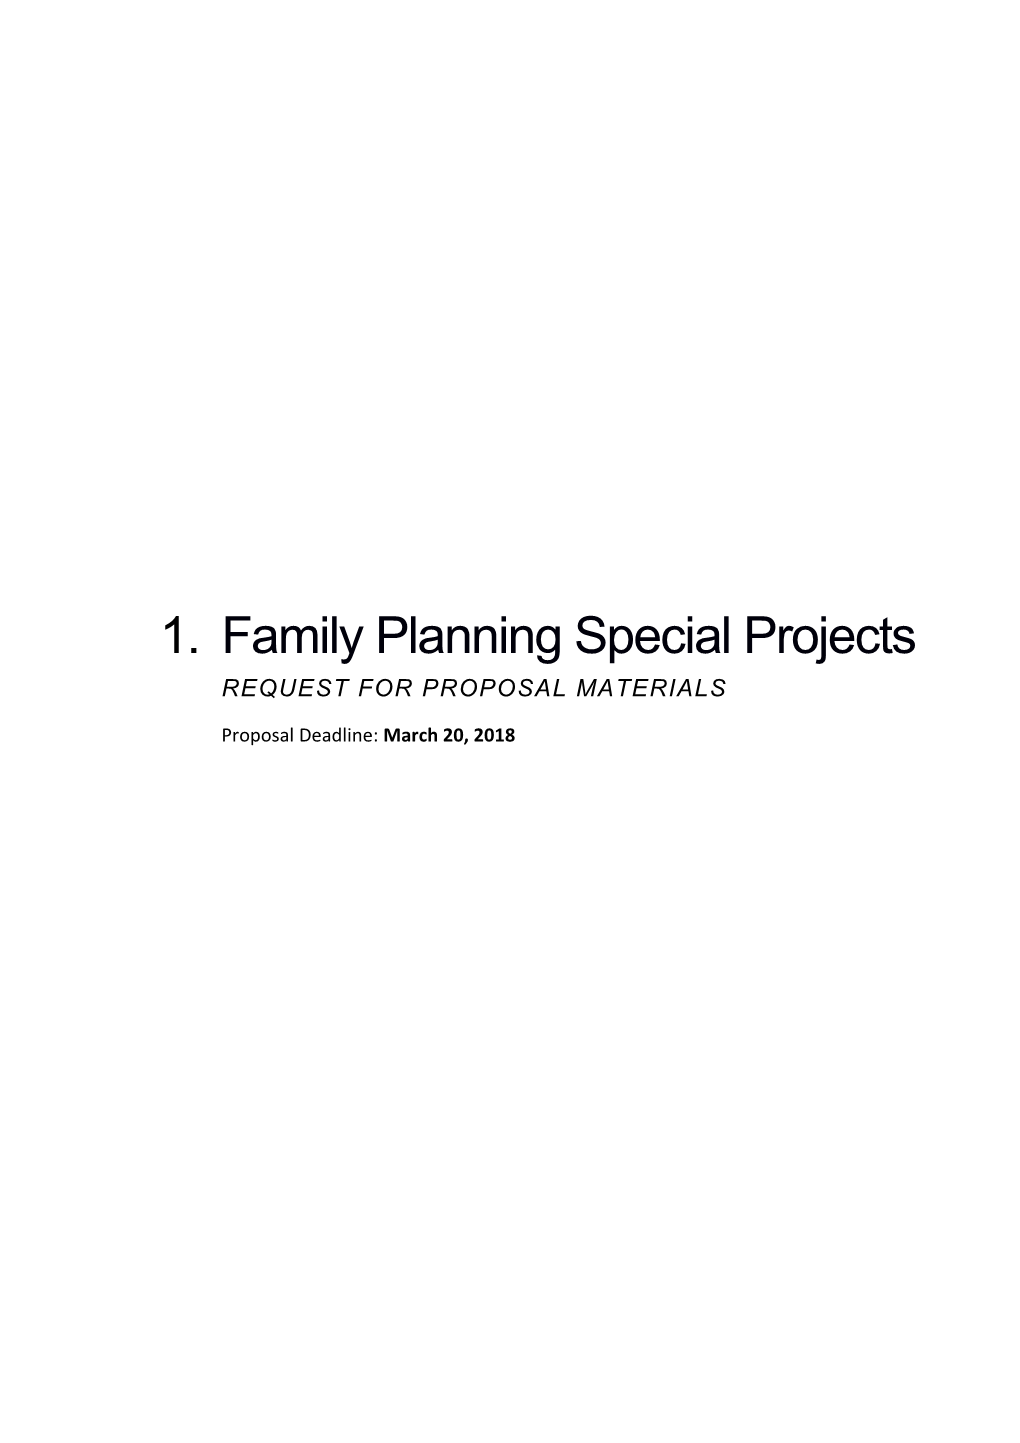 Family Planning Special Projects RFP